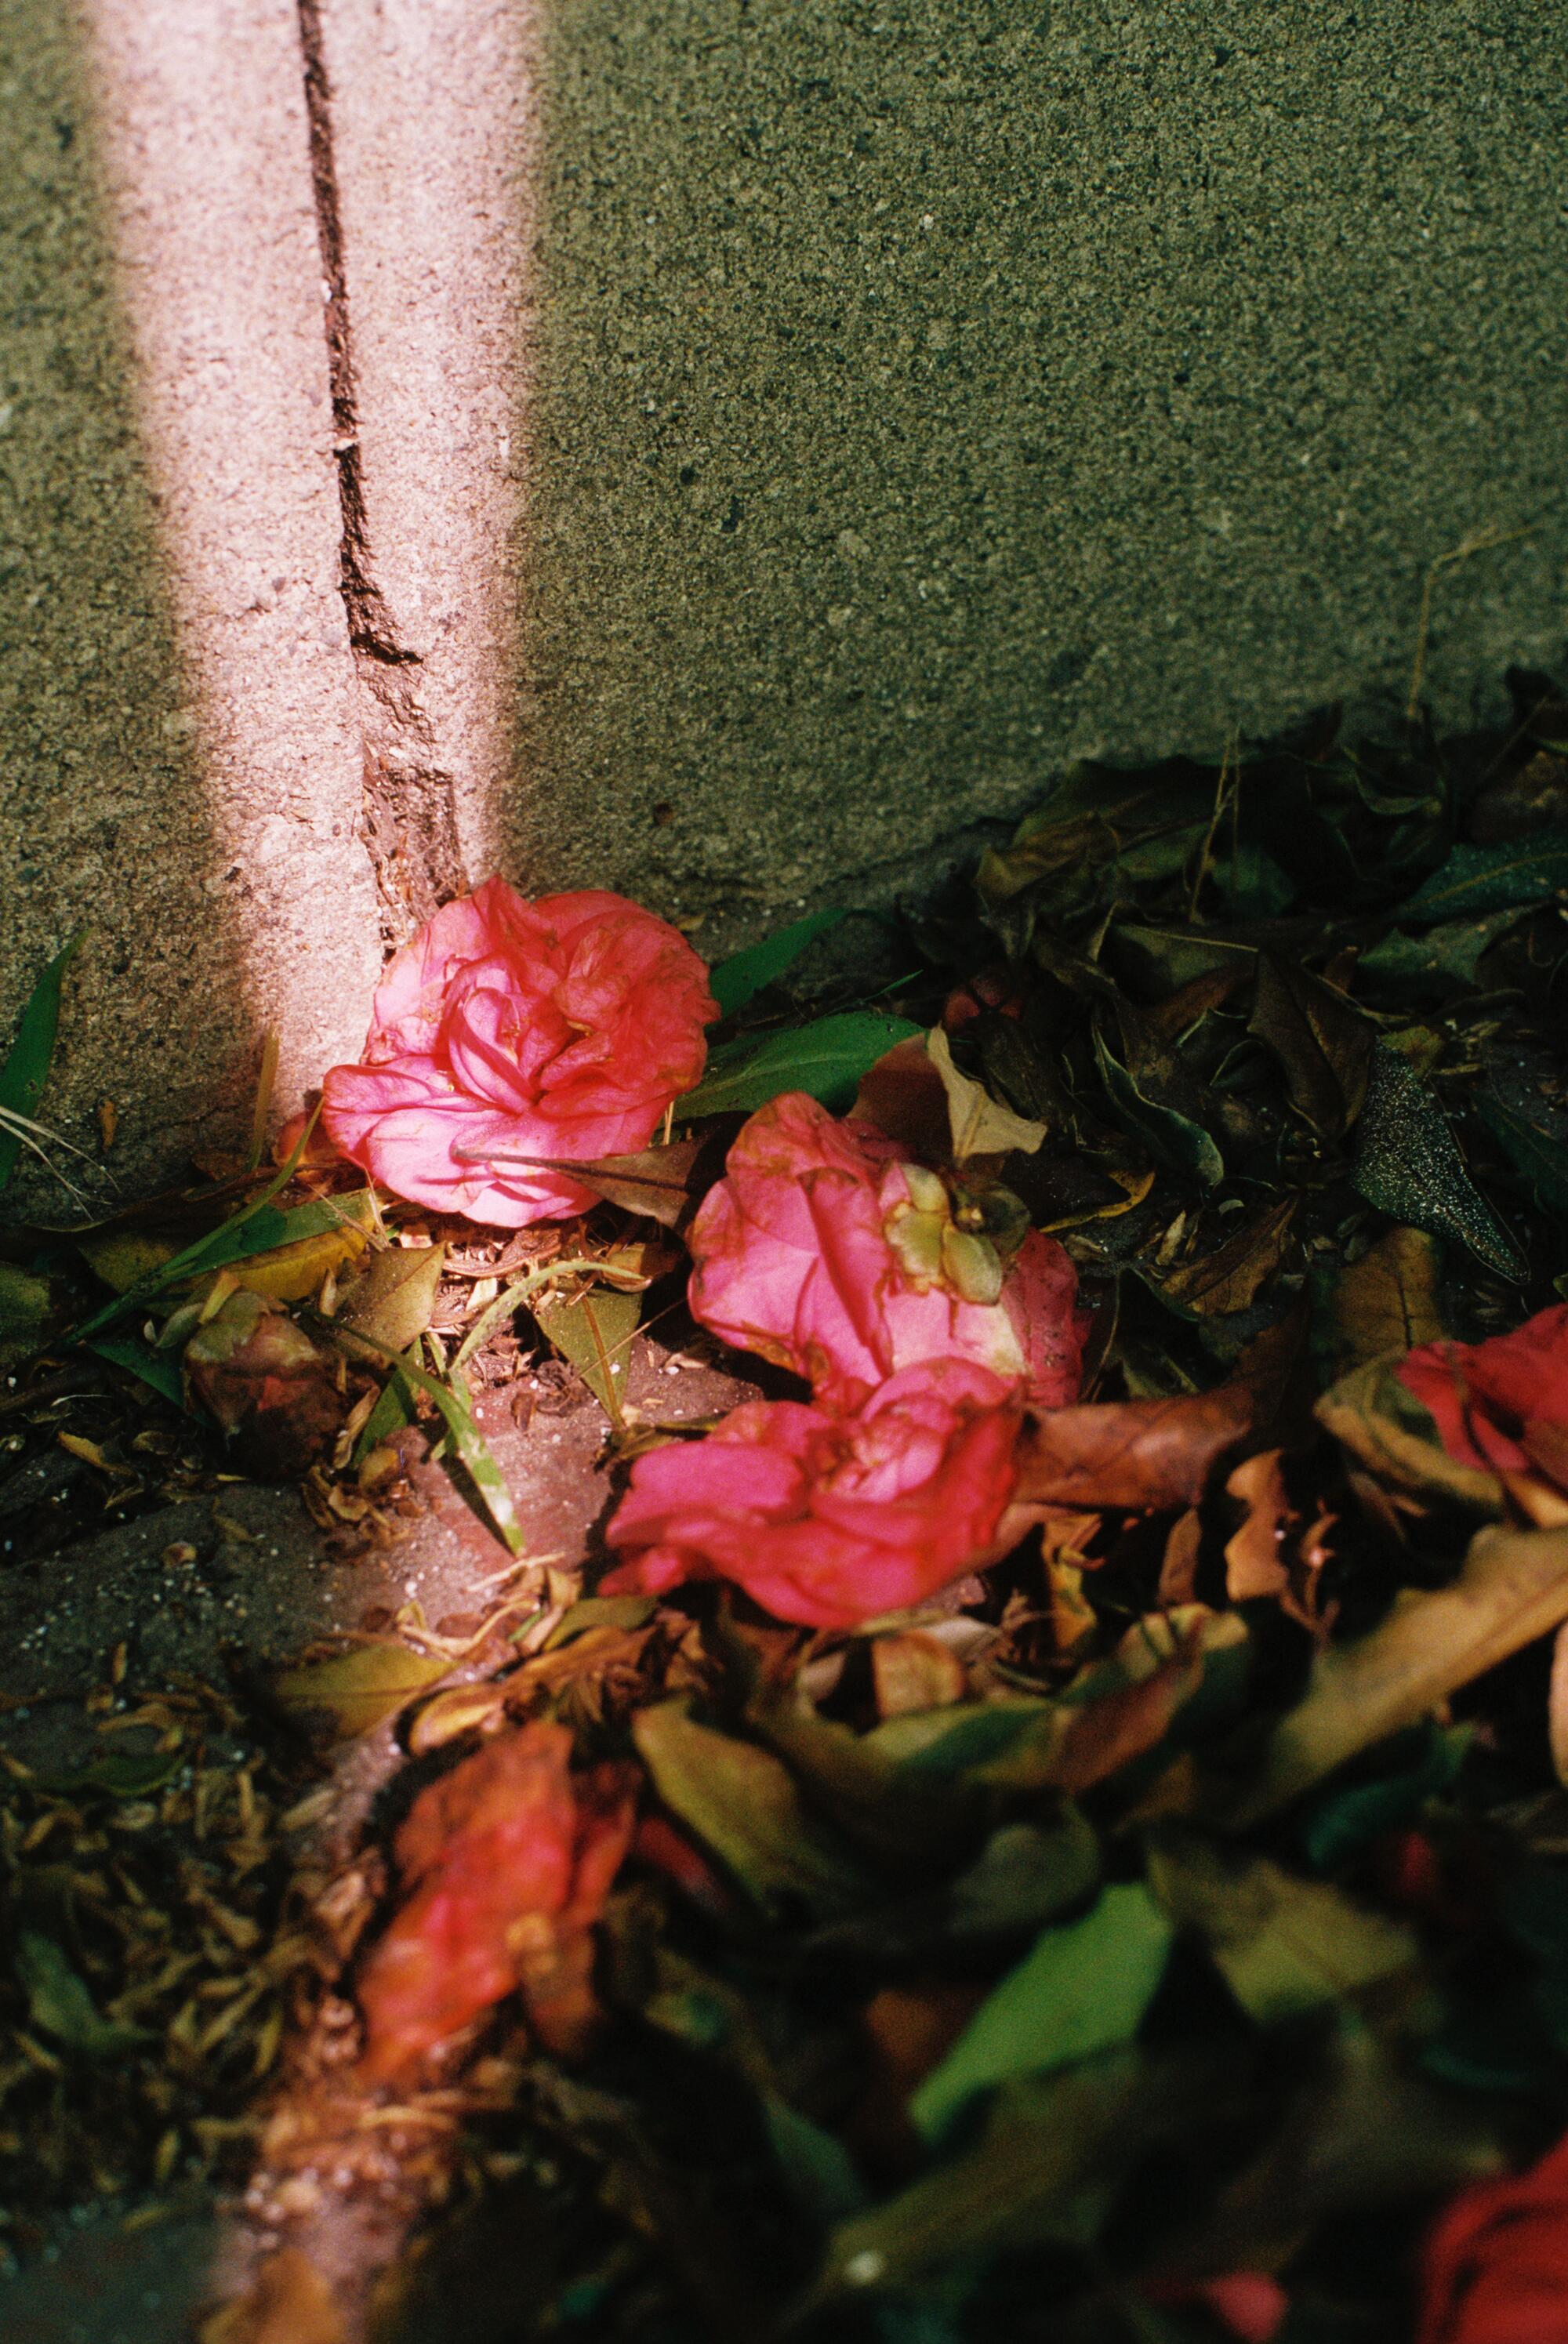 Roses on the ground in a sliver of sunlight